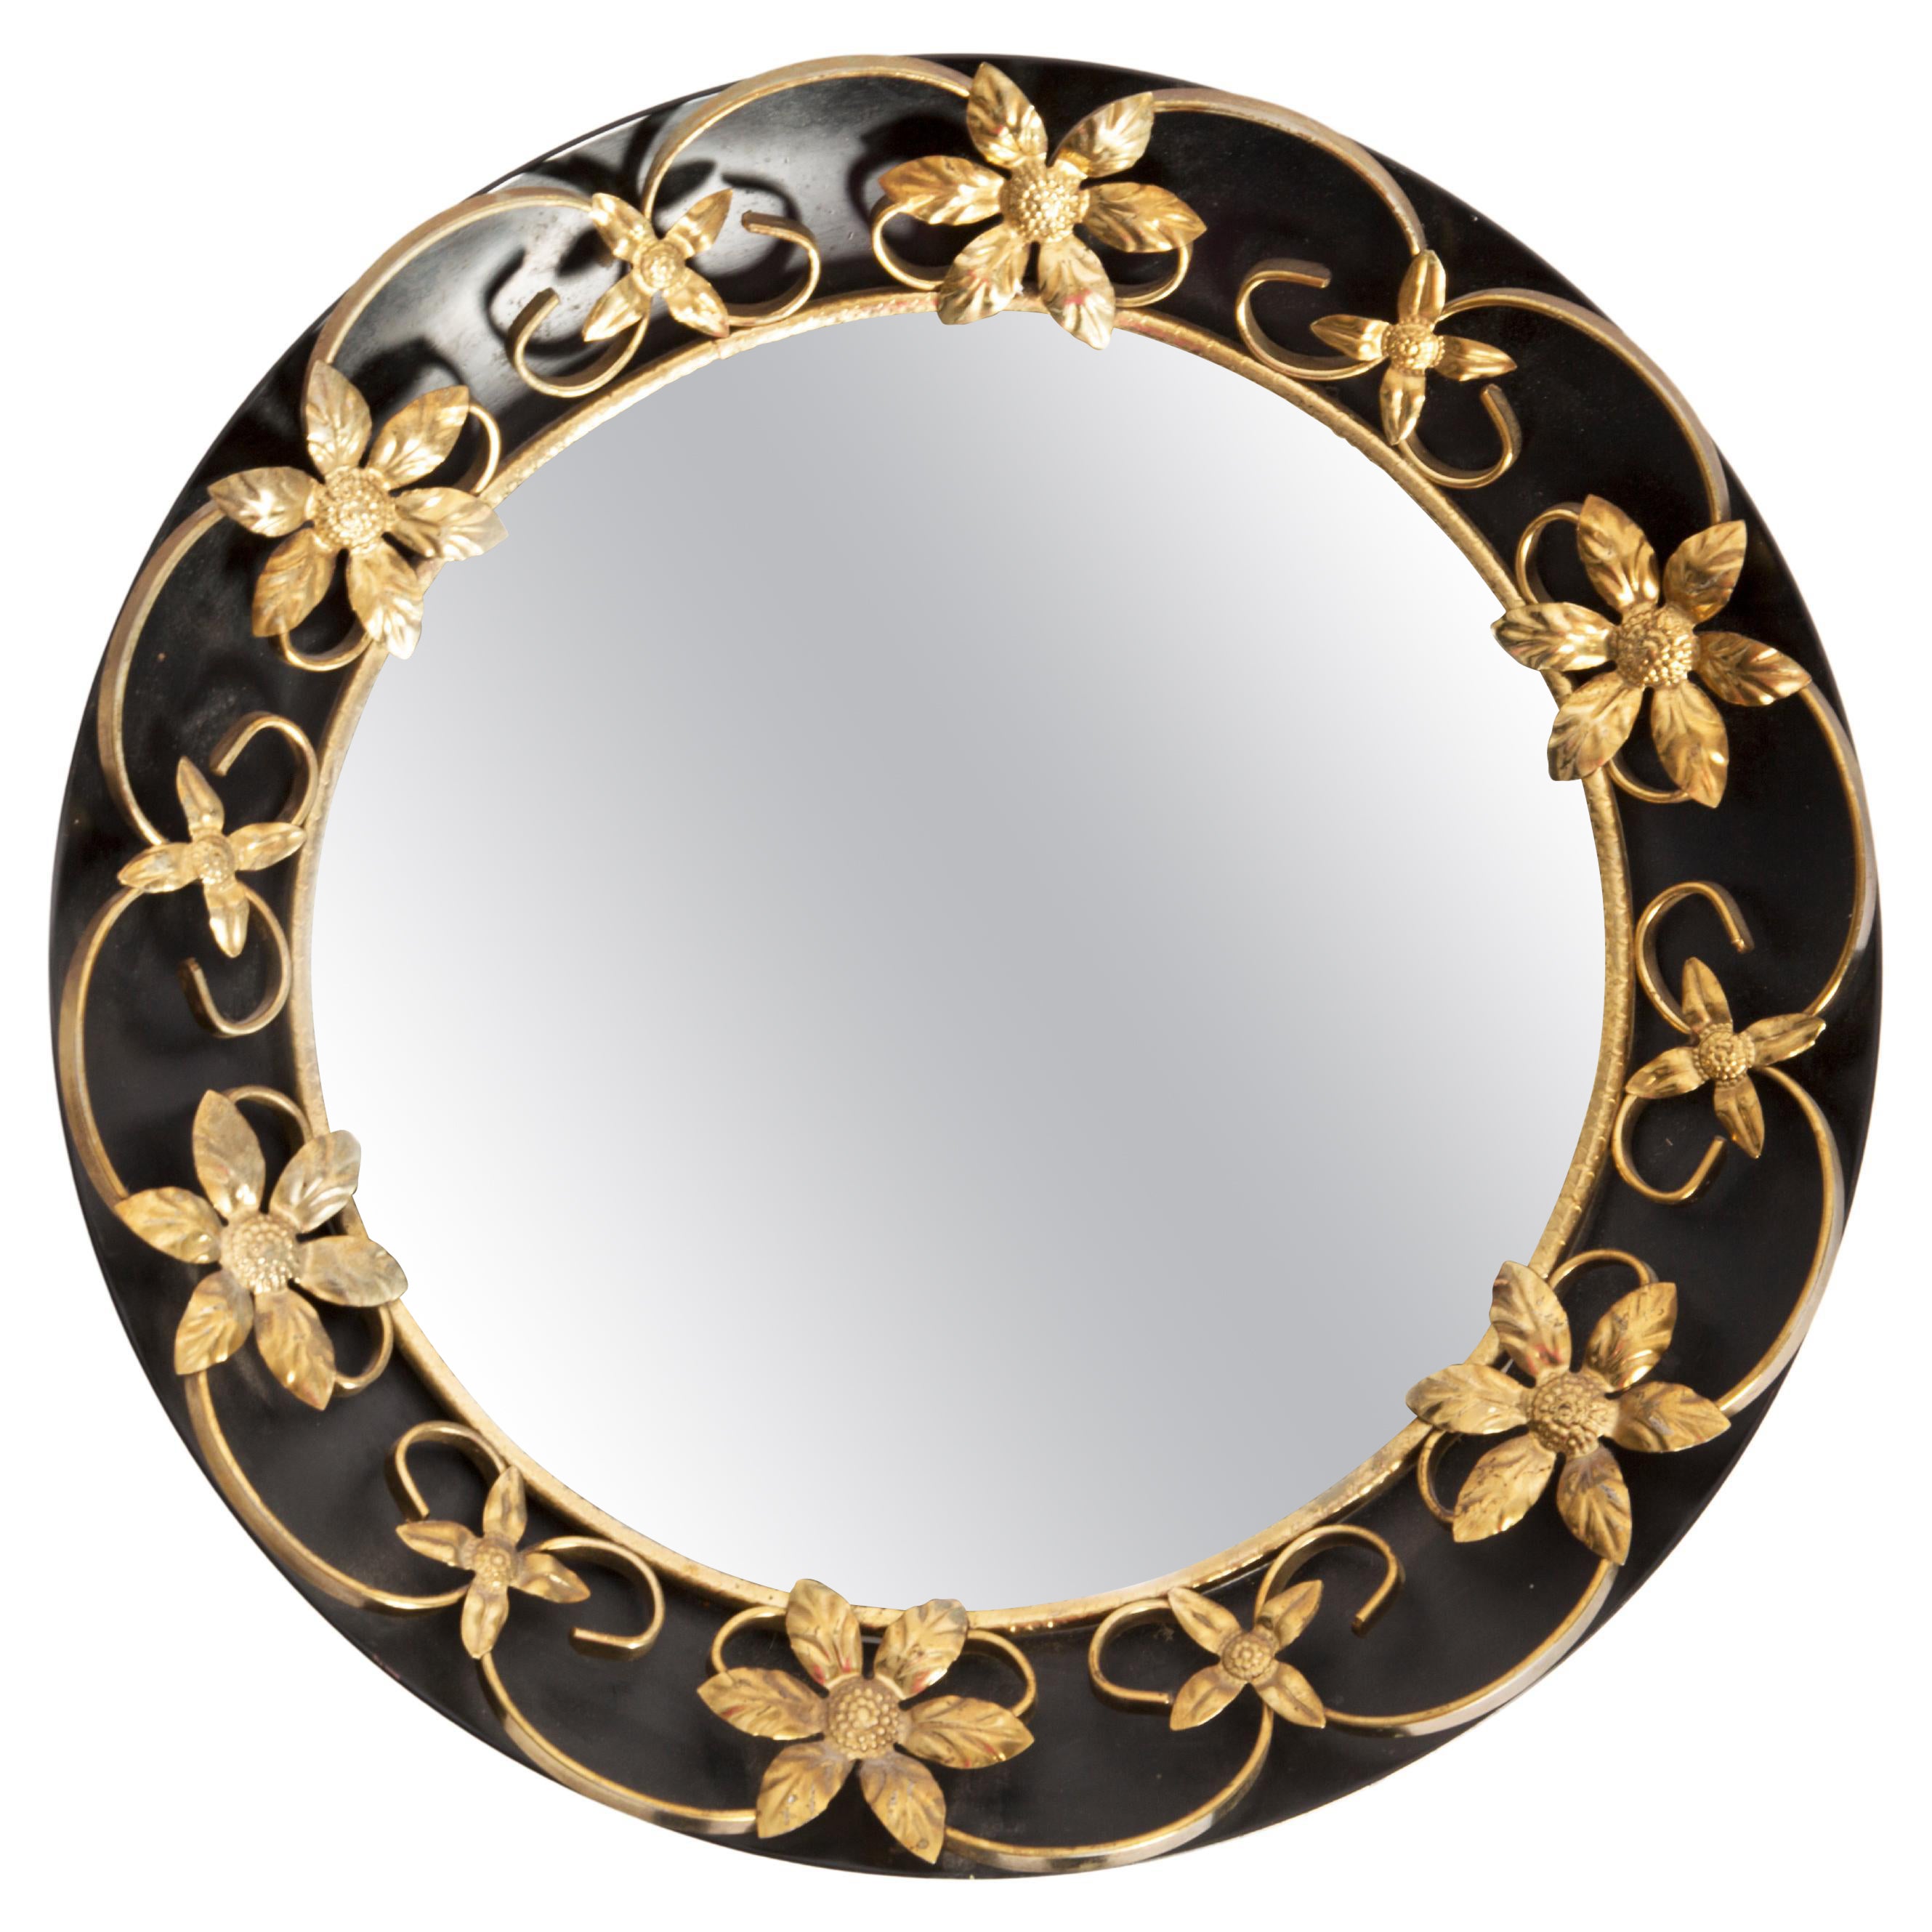 Vintage Oval Gold and Black Decorative Mirror in Flowers Frame, Italy, 1960s For Sale